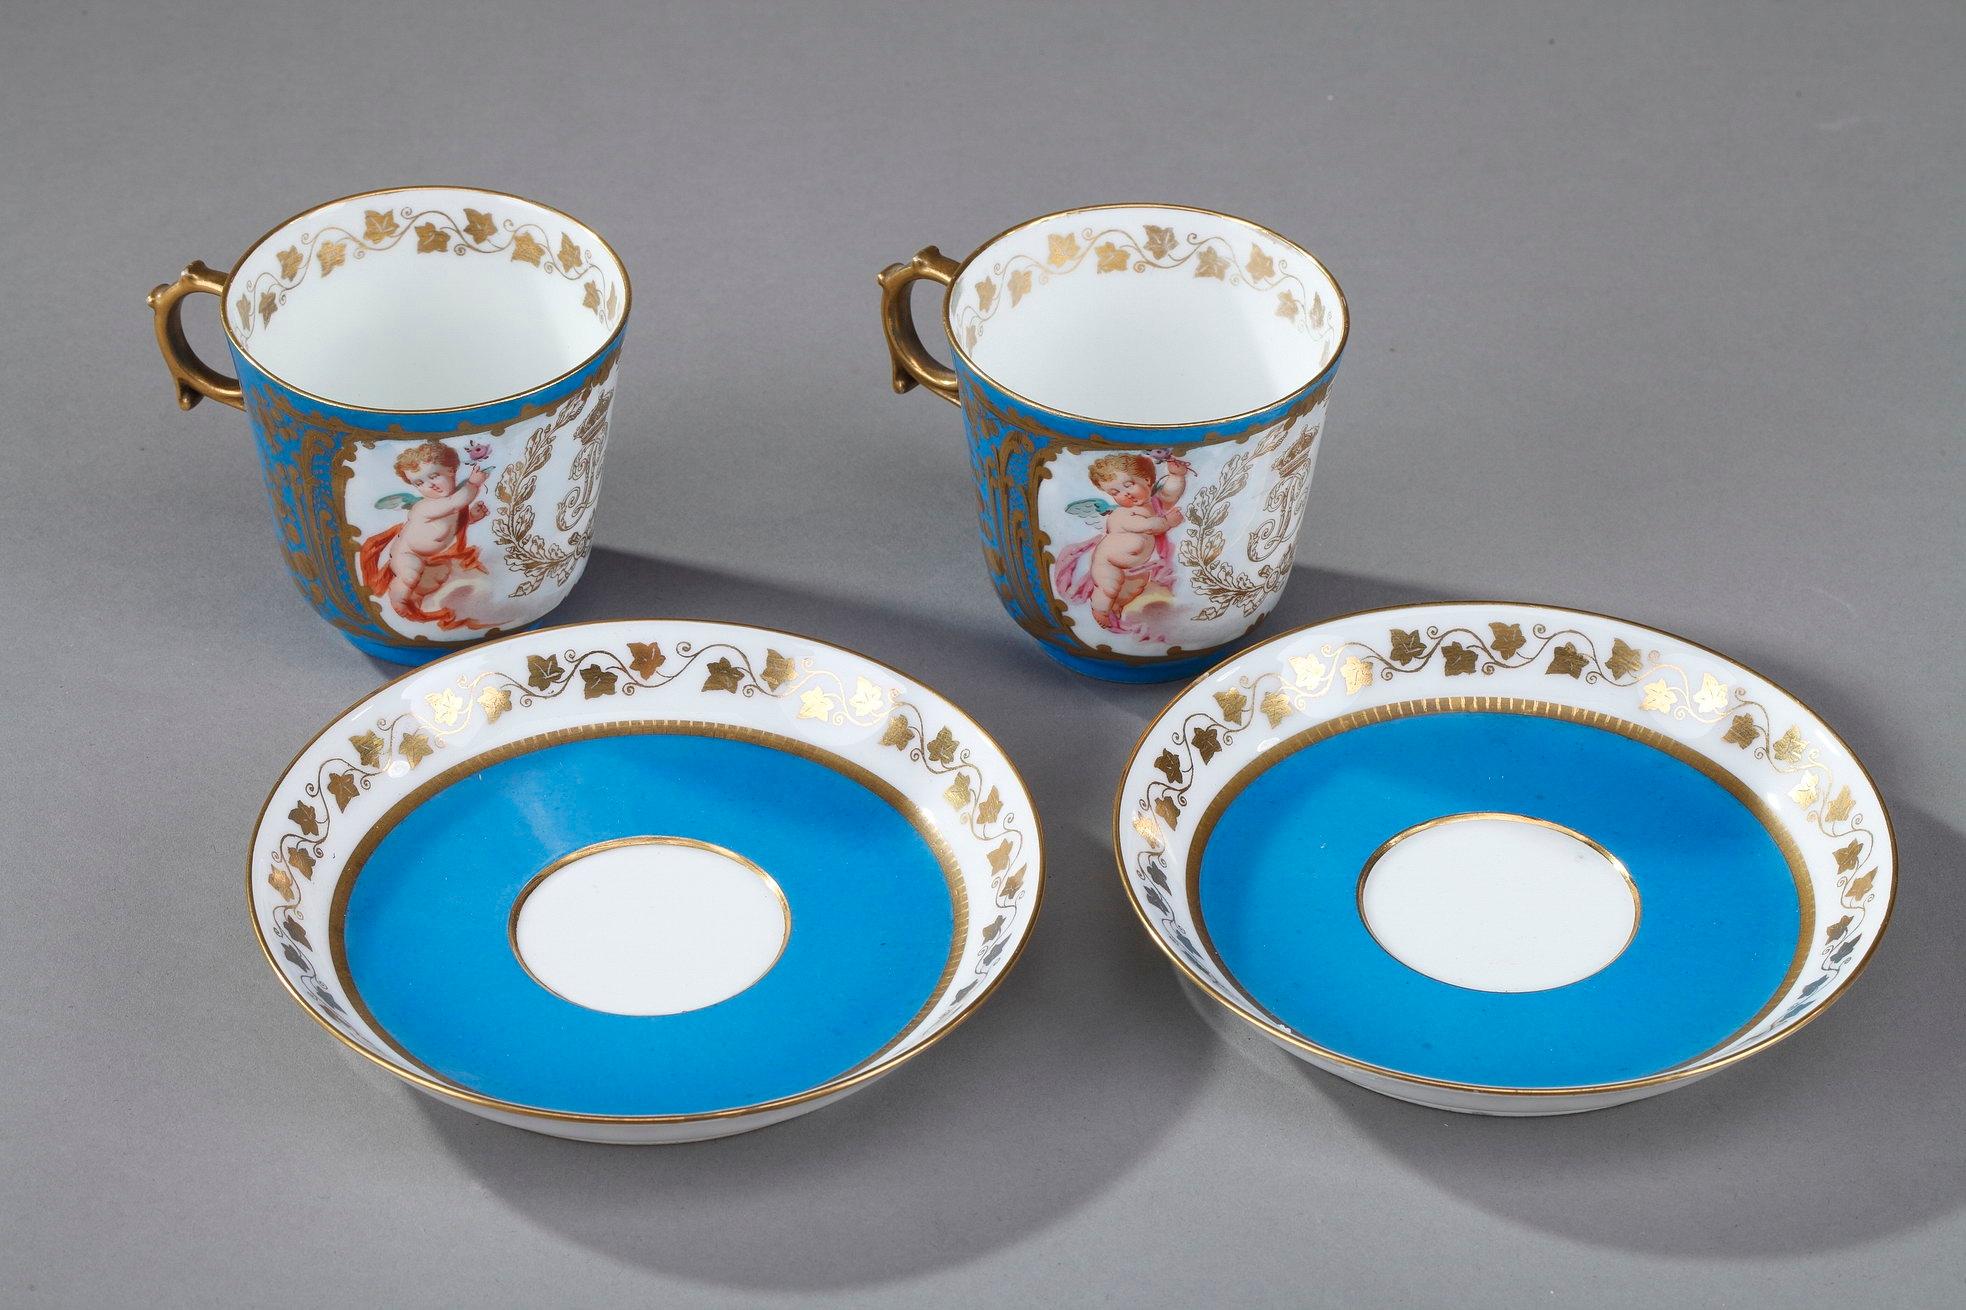 Tea Service with Sevres and Château des Tuileries Marks For Sale 8